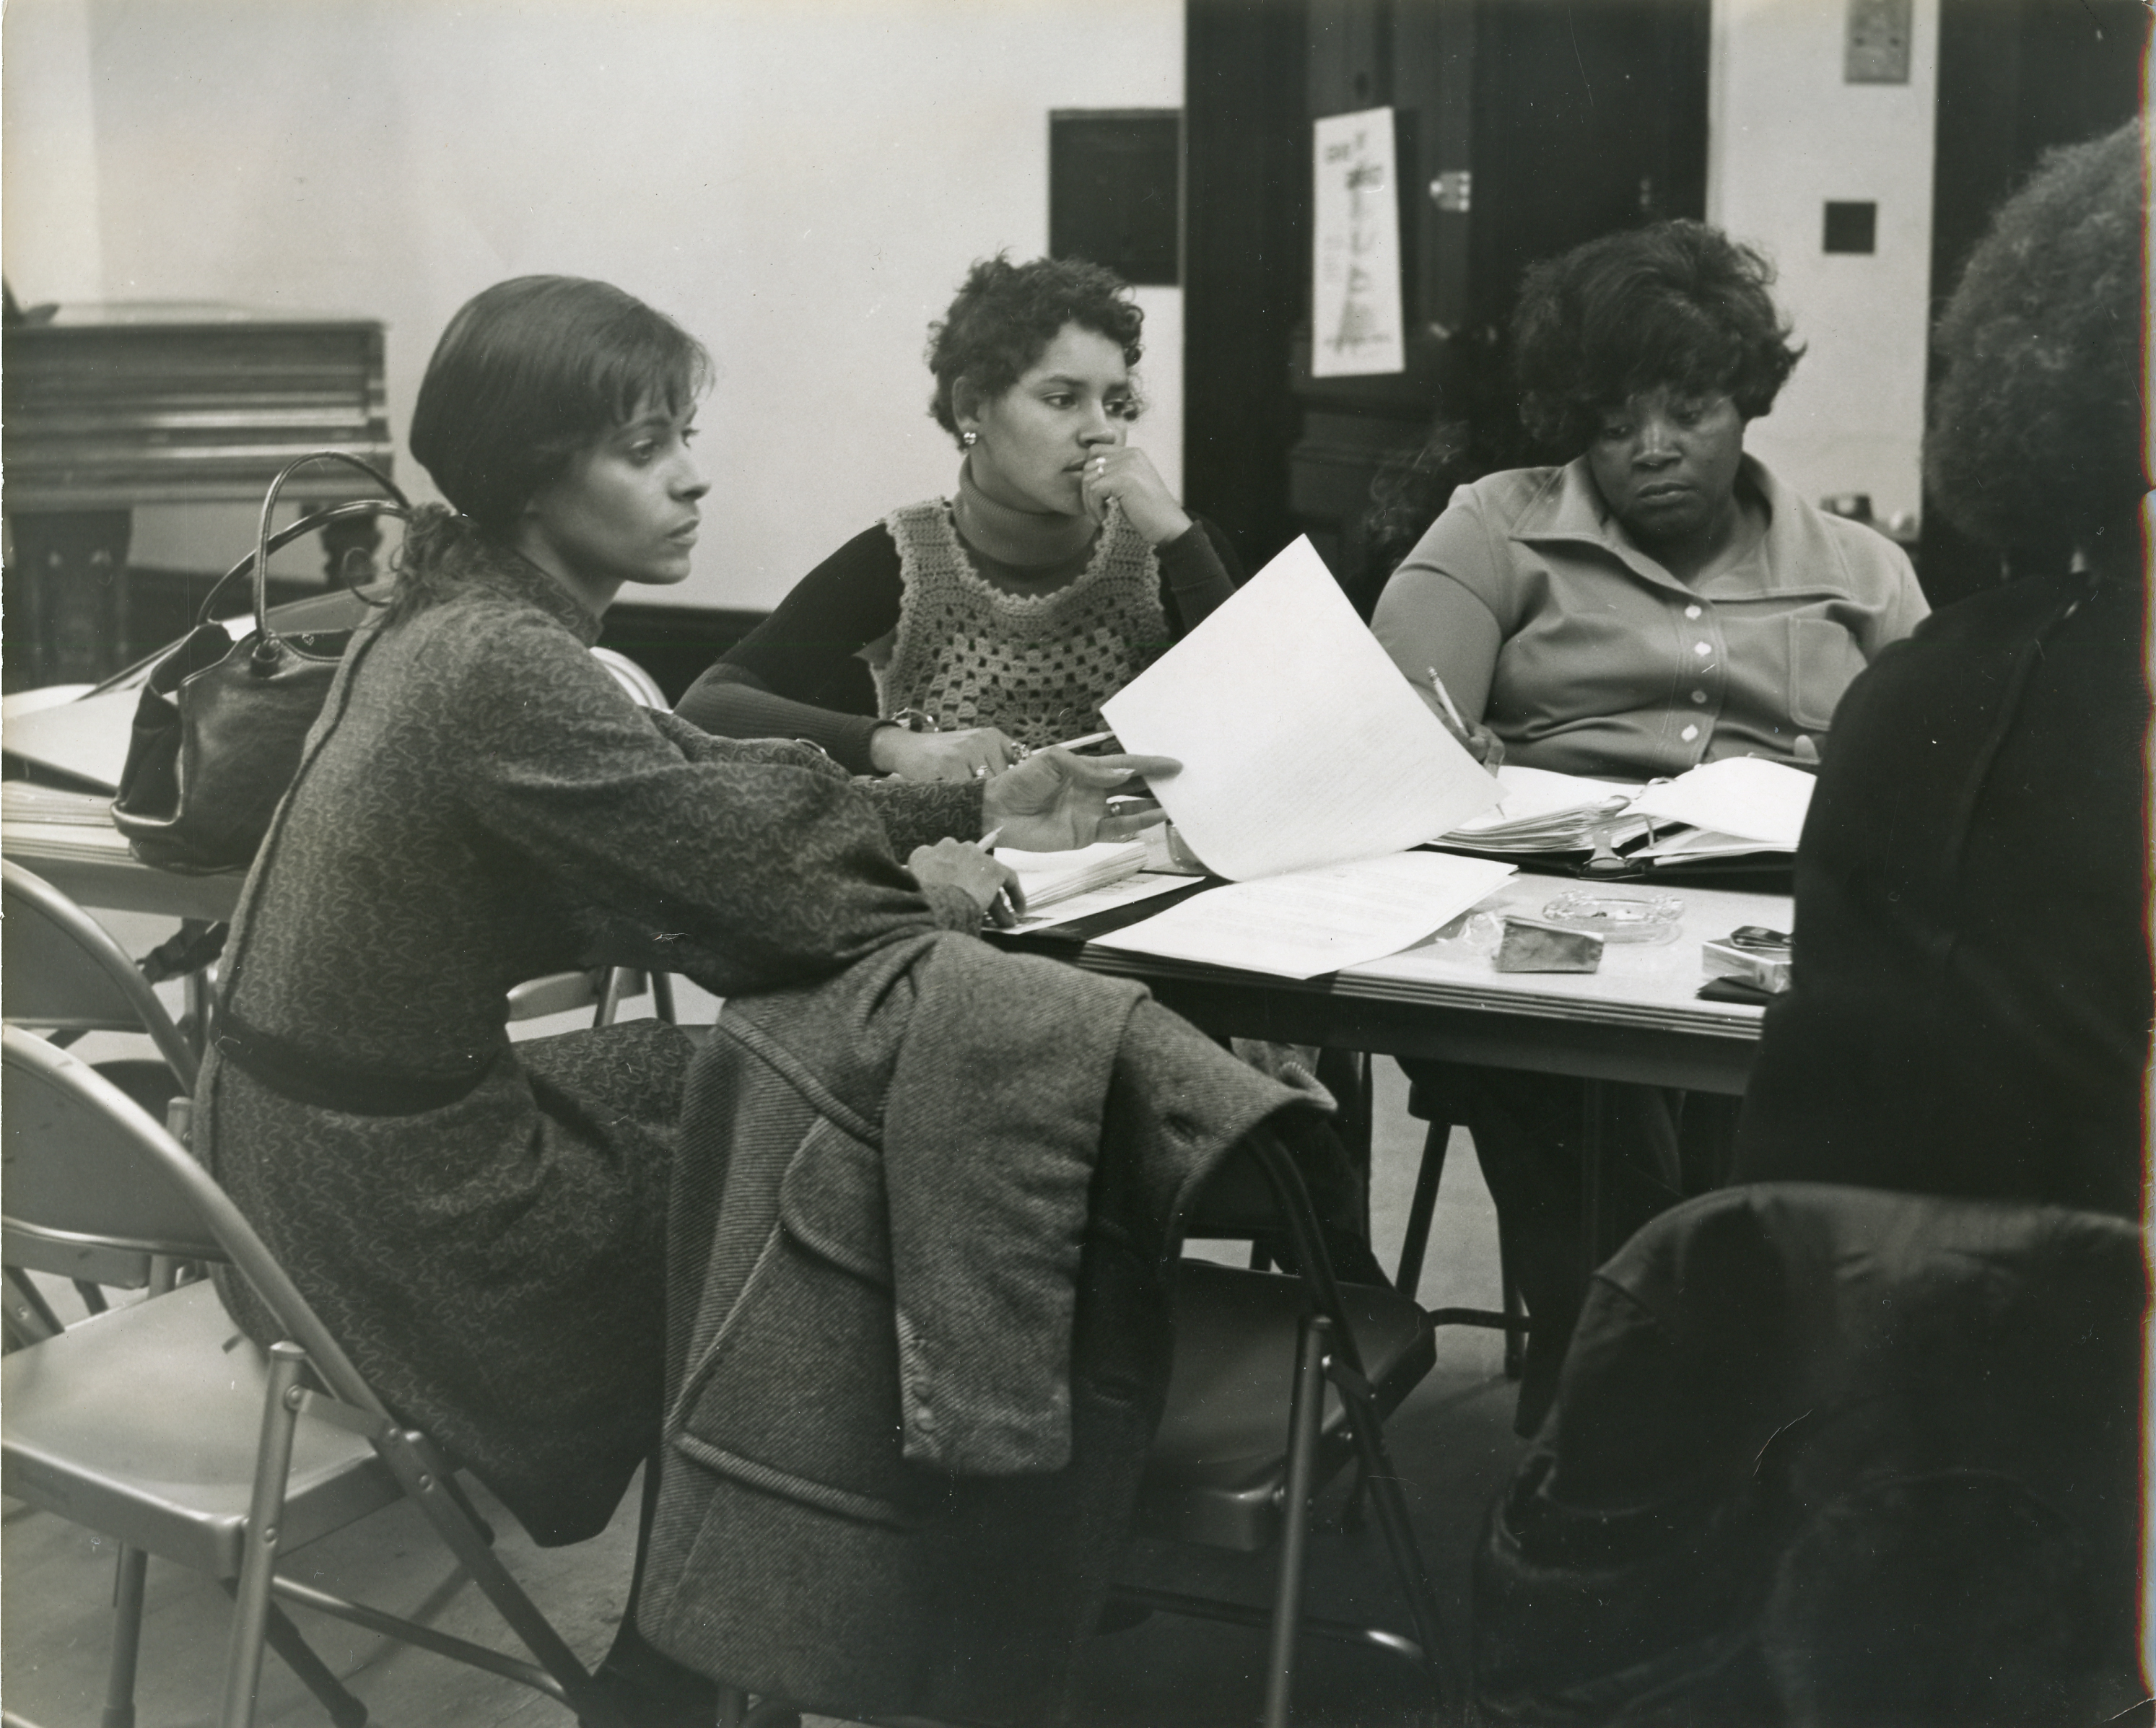 A black and white photograph shows several women sitting around a table with open binders and pieces of paper on the table.